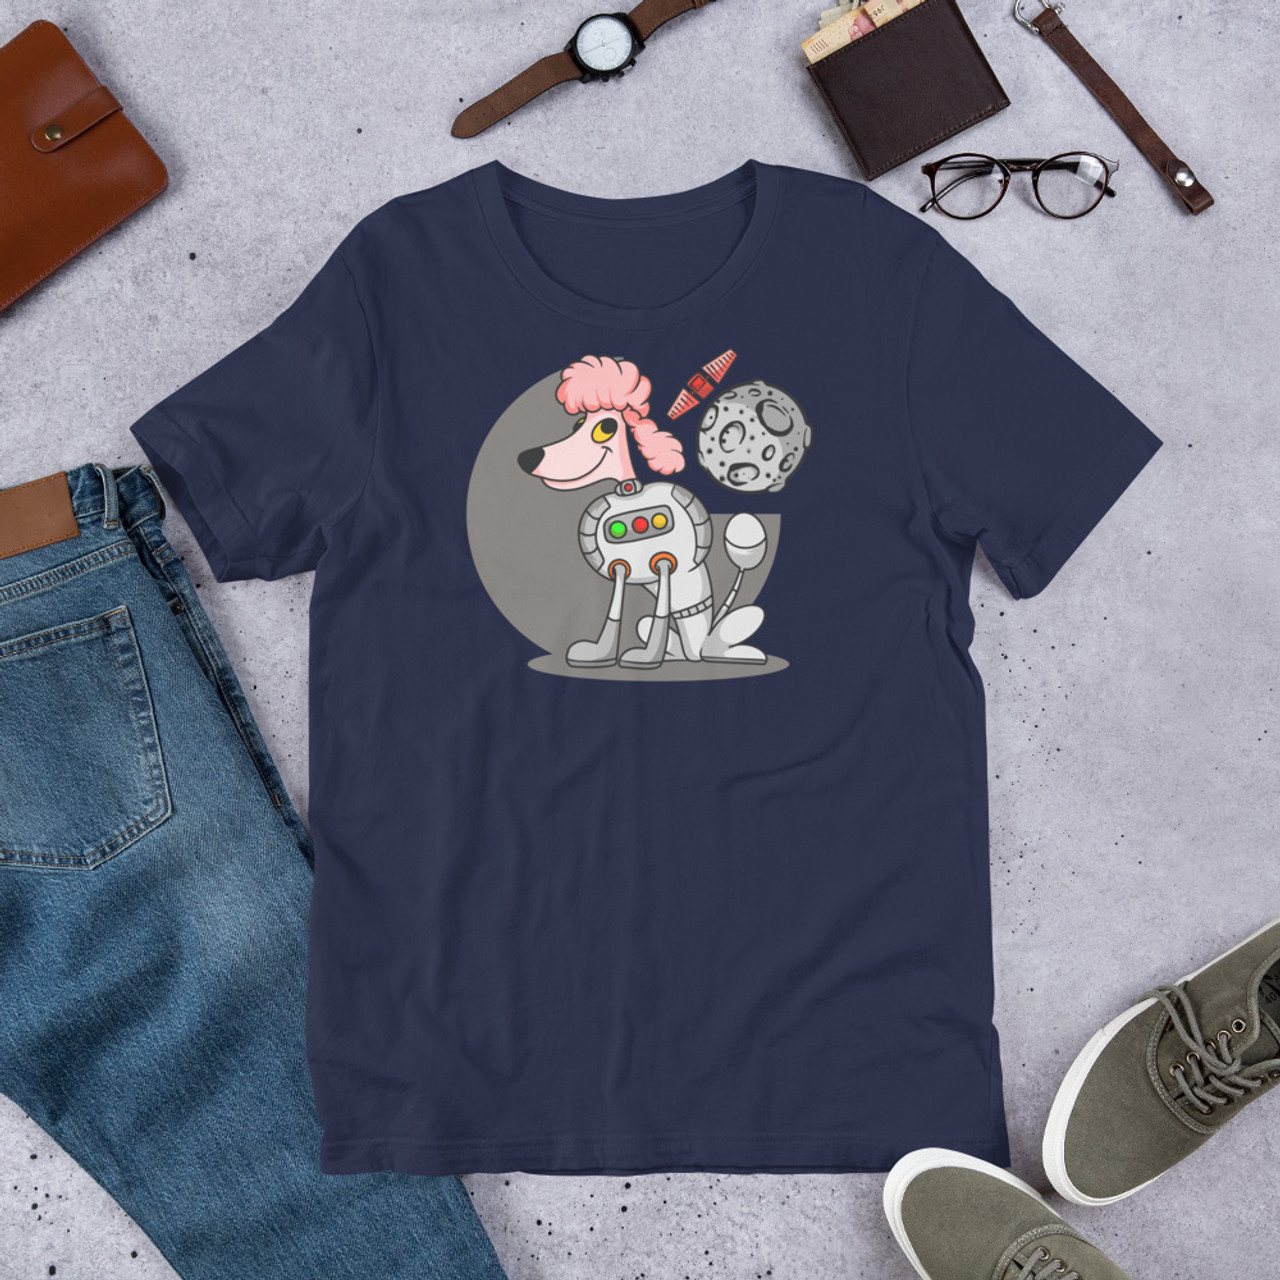 Navy T-Shirt - Bella + Canvas 3001 Pink Space Poodle